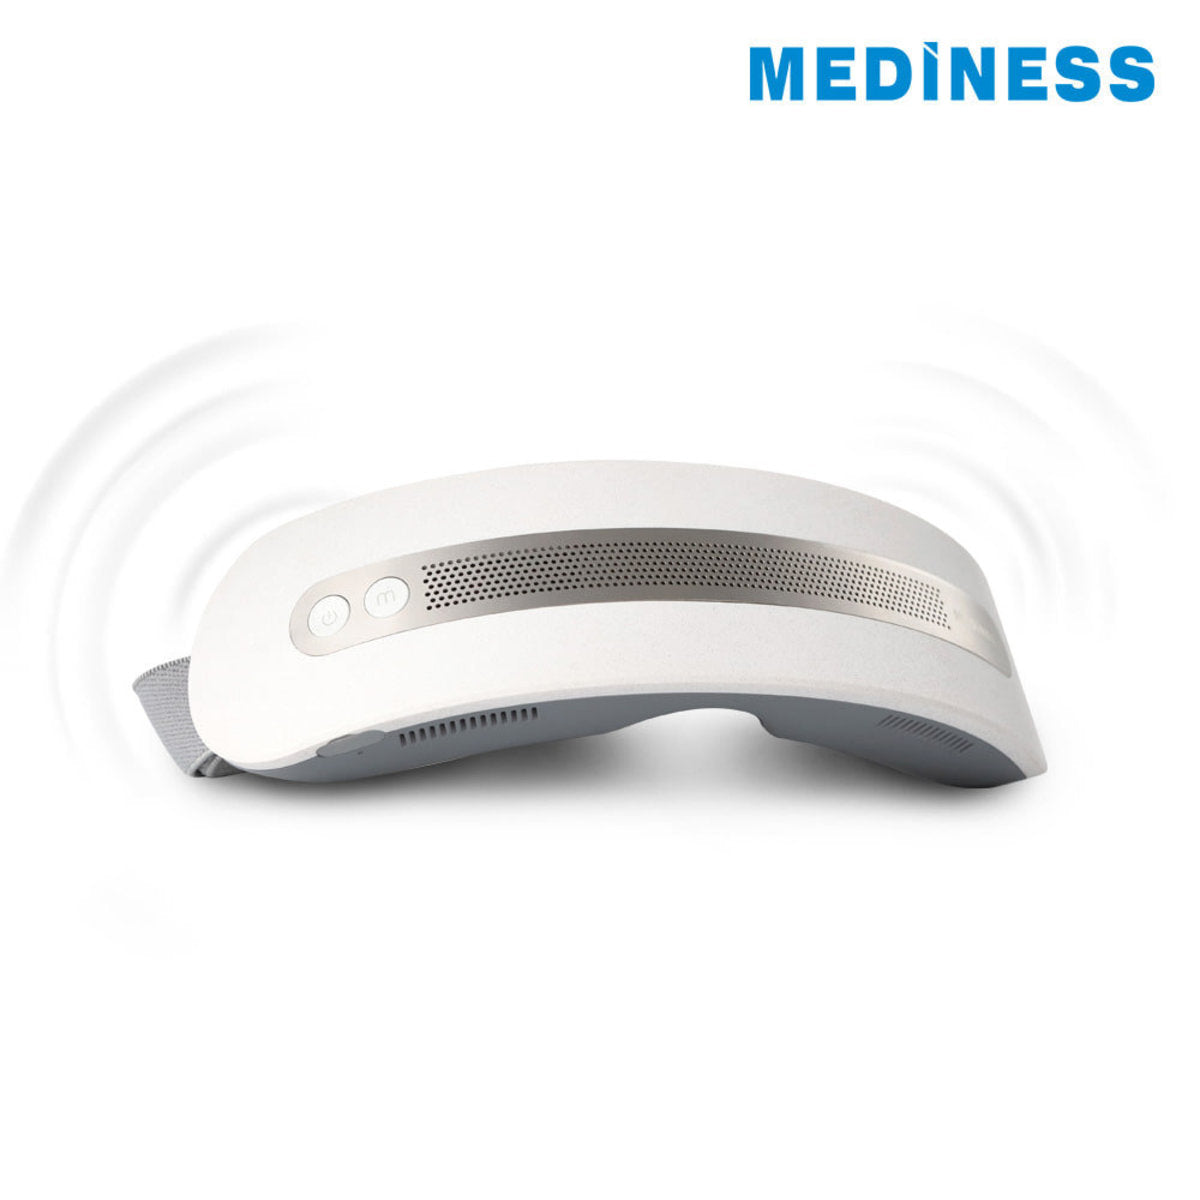 Mediness - MBE-8000 "Eye God" Eye Massager｜Hot and cold eye compresses｜Music playing via Bluetooth